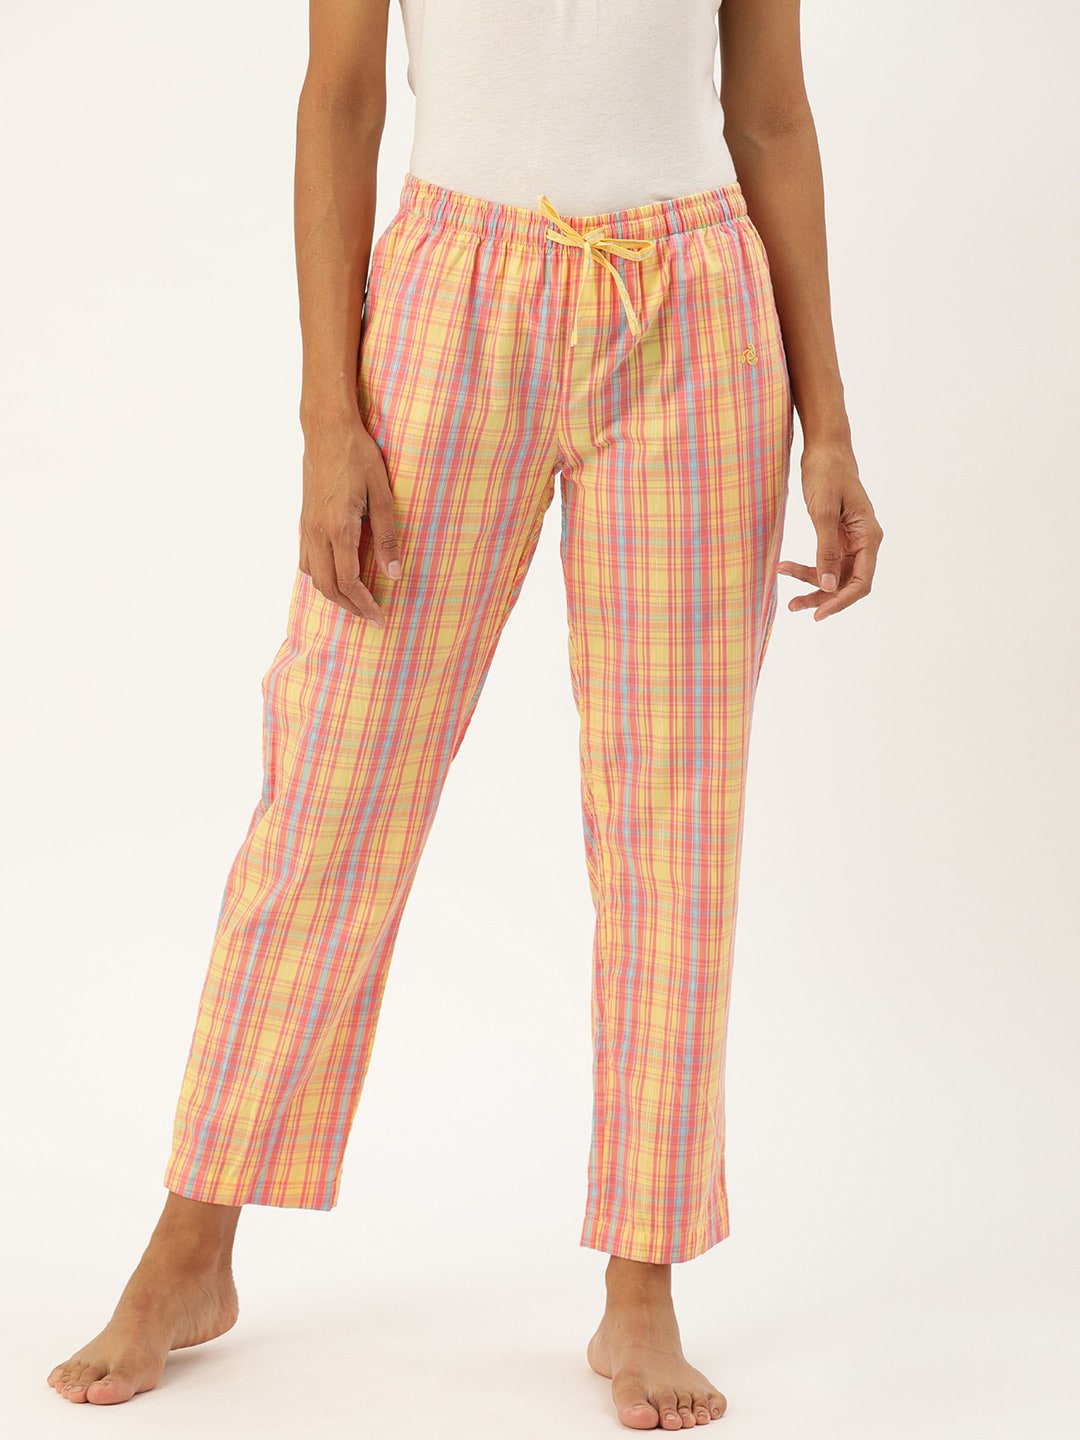 Jockey Woman's Peach and Blue Checked Lounge Pants Price in India